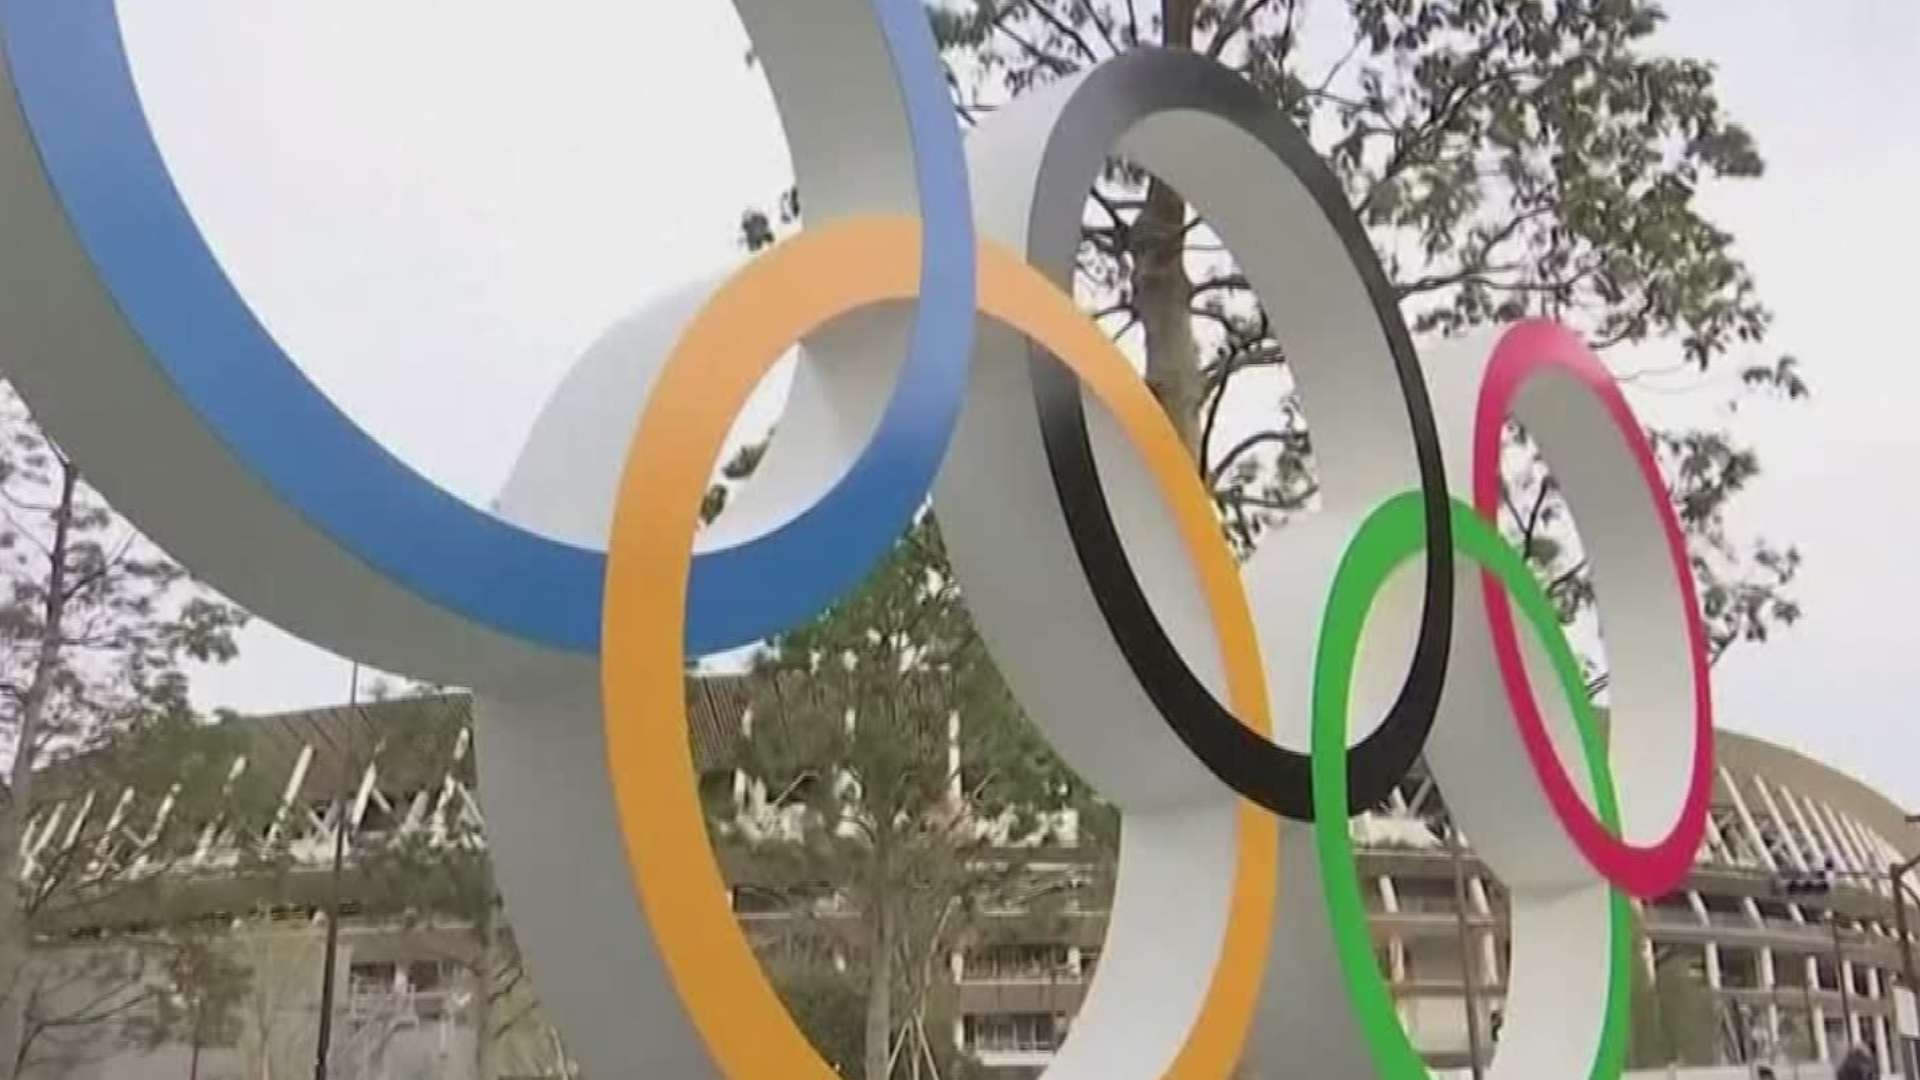 Veteran International Olympic Committee member Dick Pound said Monday he believes the 2020 Tokyo Olympic Games are going to be postponed, according to USA Today.